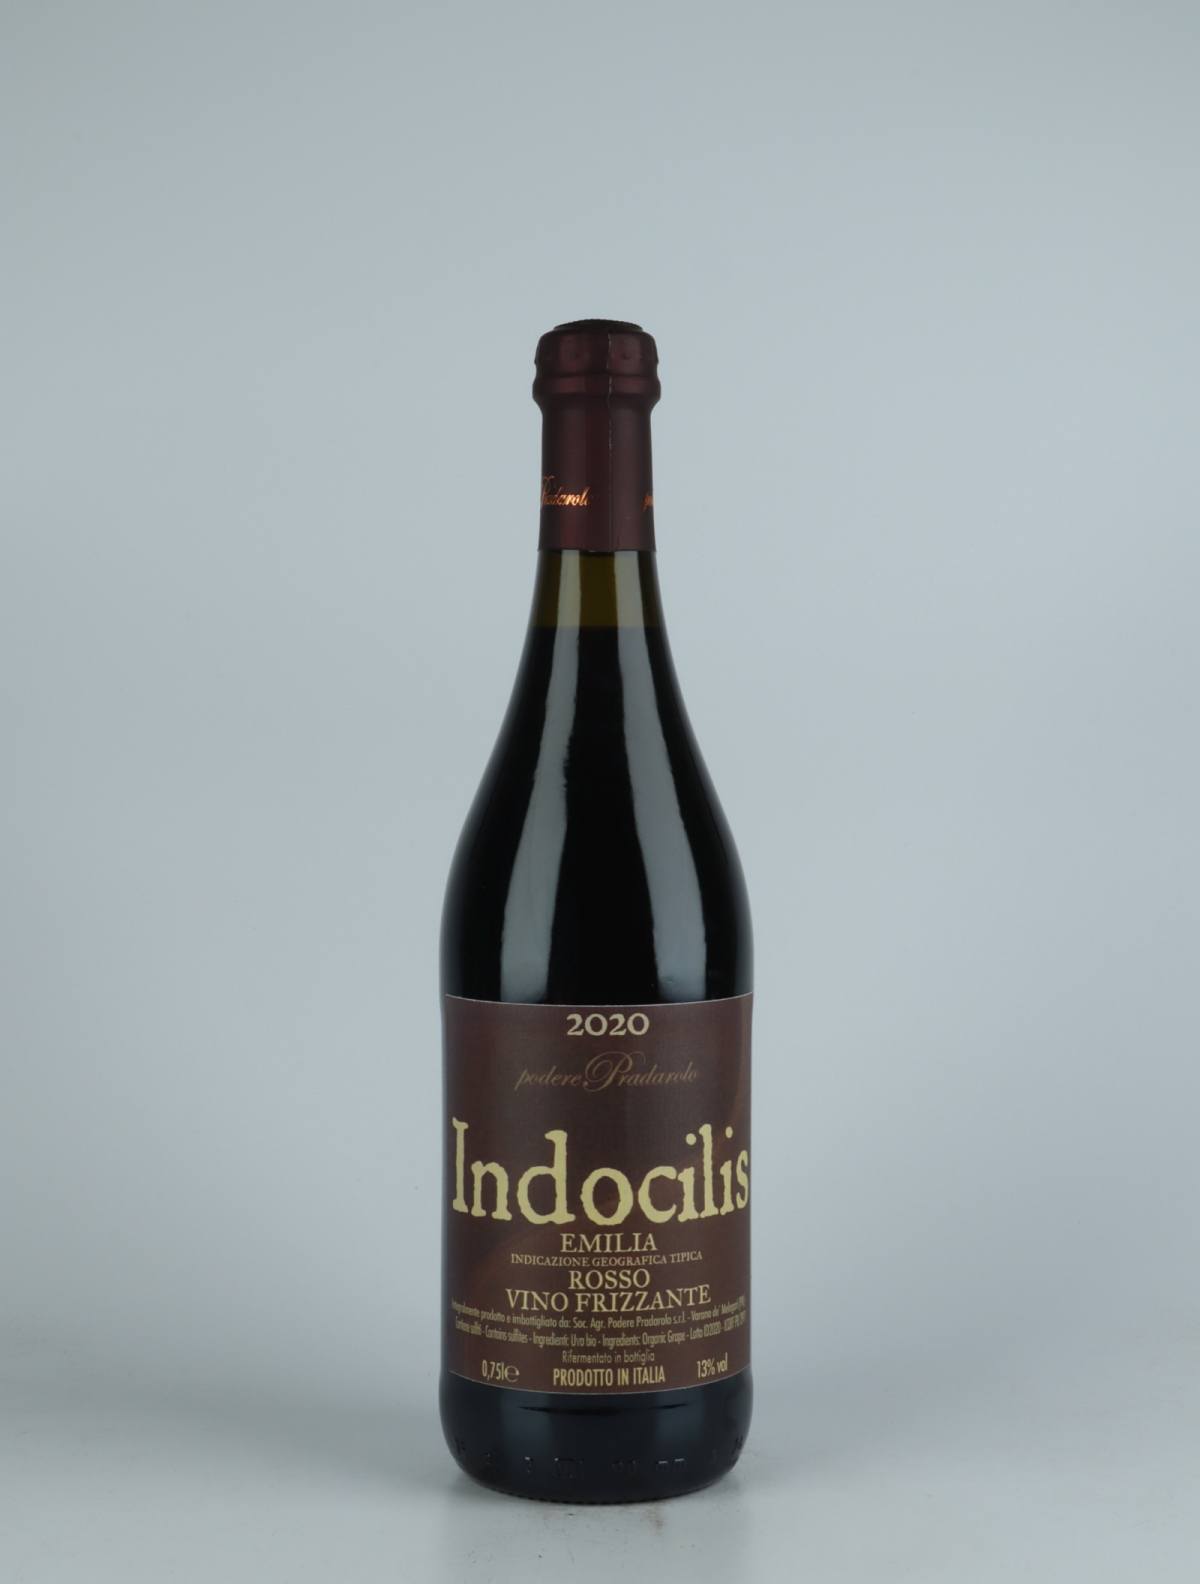 A bottle 2020 Indocilis Sparkling from Podere Pradarolo, Emilia-Romagna in Italy